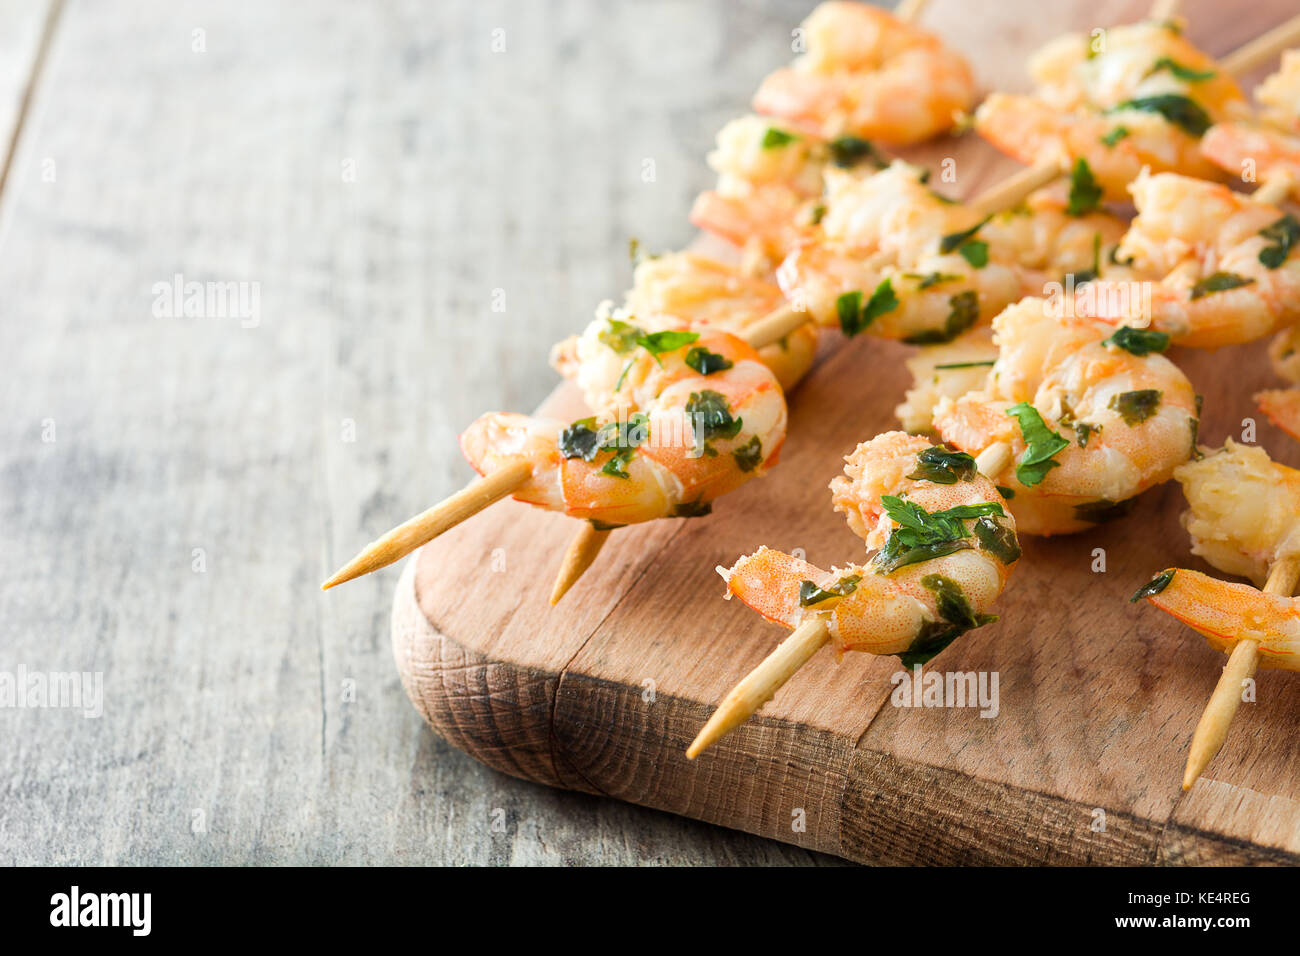 Shrimp skewers on wooden table Stock Photo